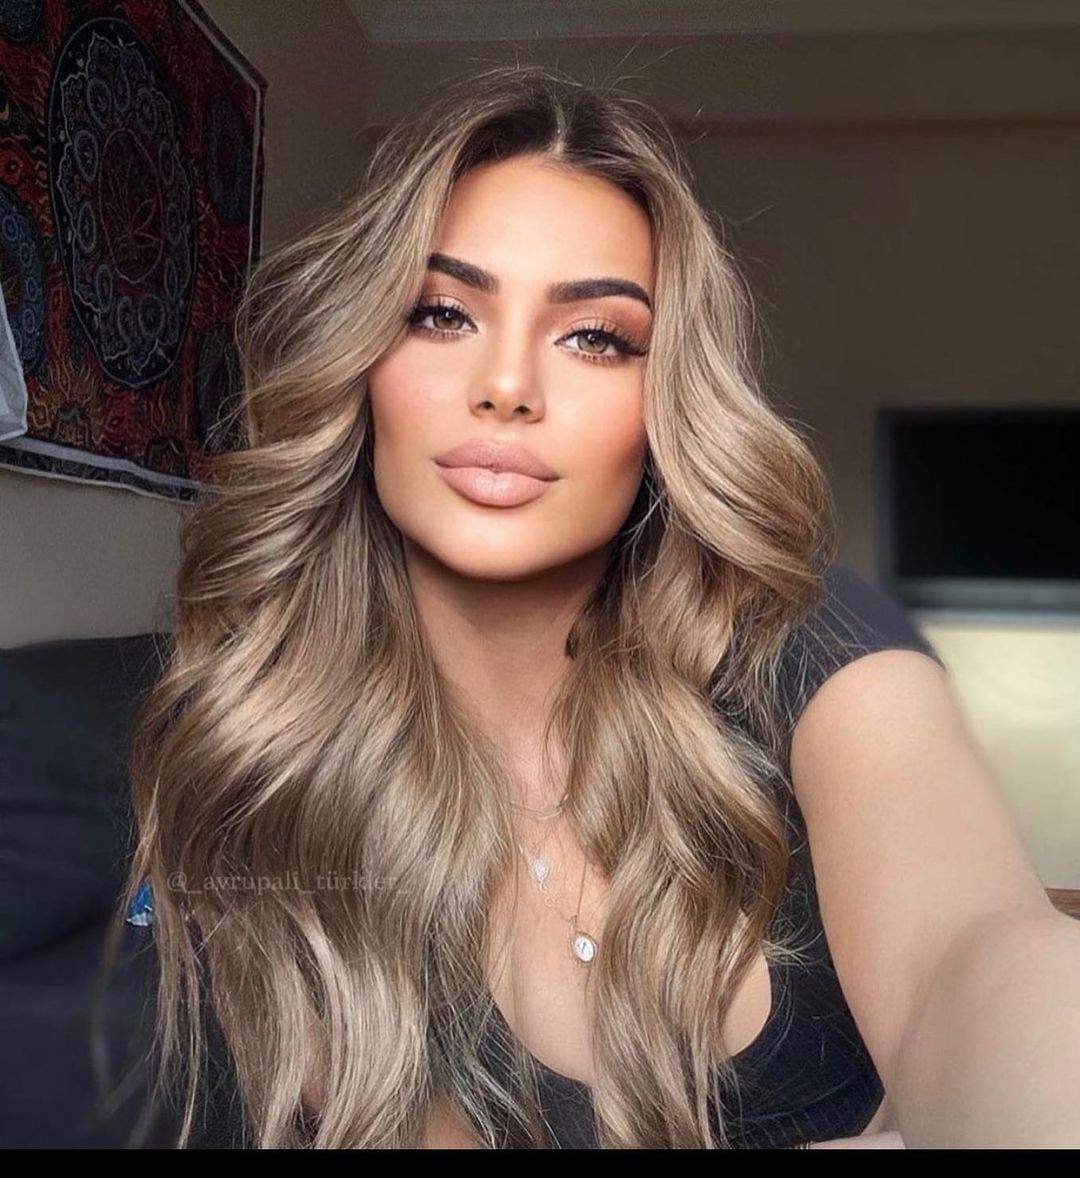 40 Greatest Long Hairstyles For Women With Long Hair In 2021 images 1